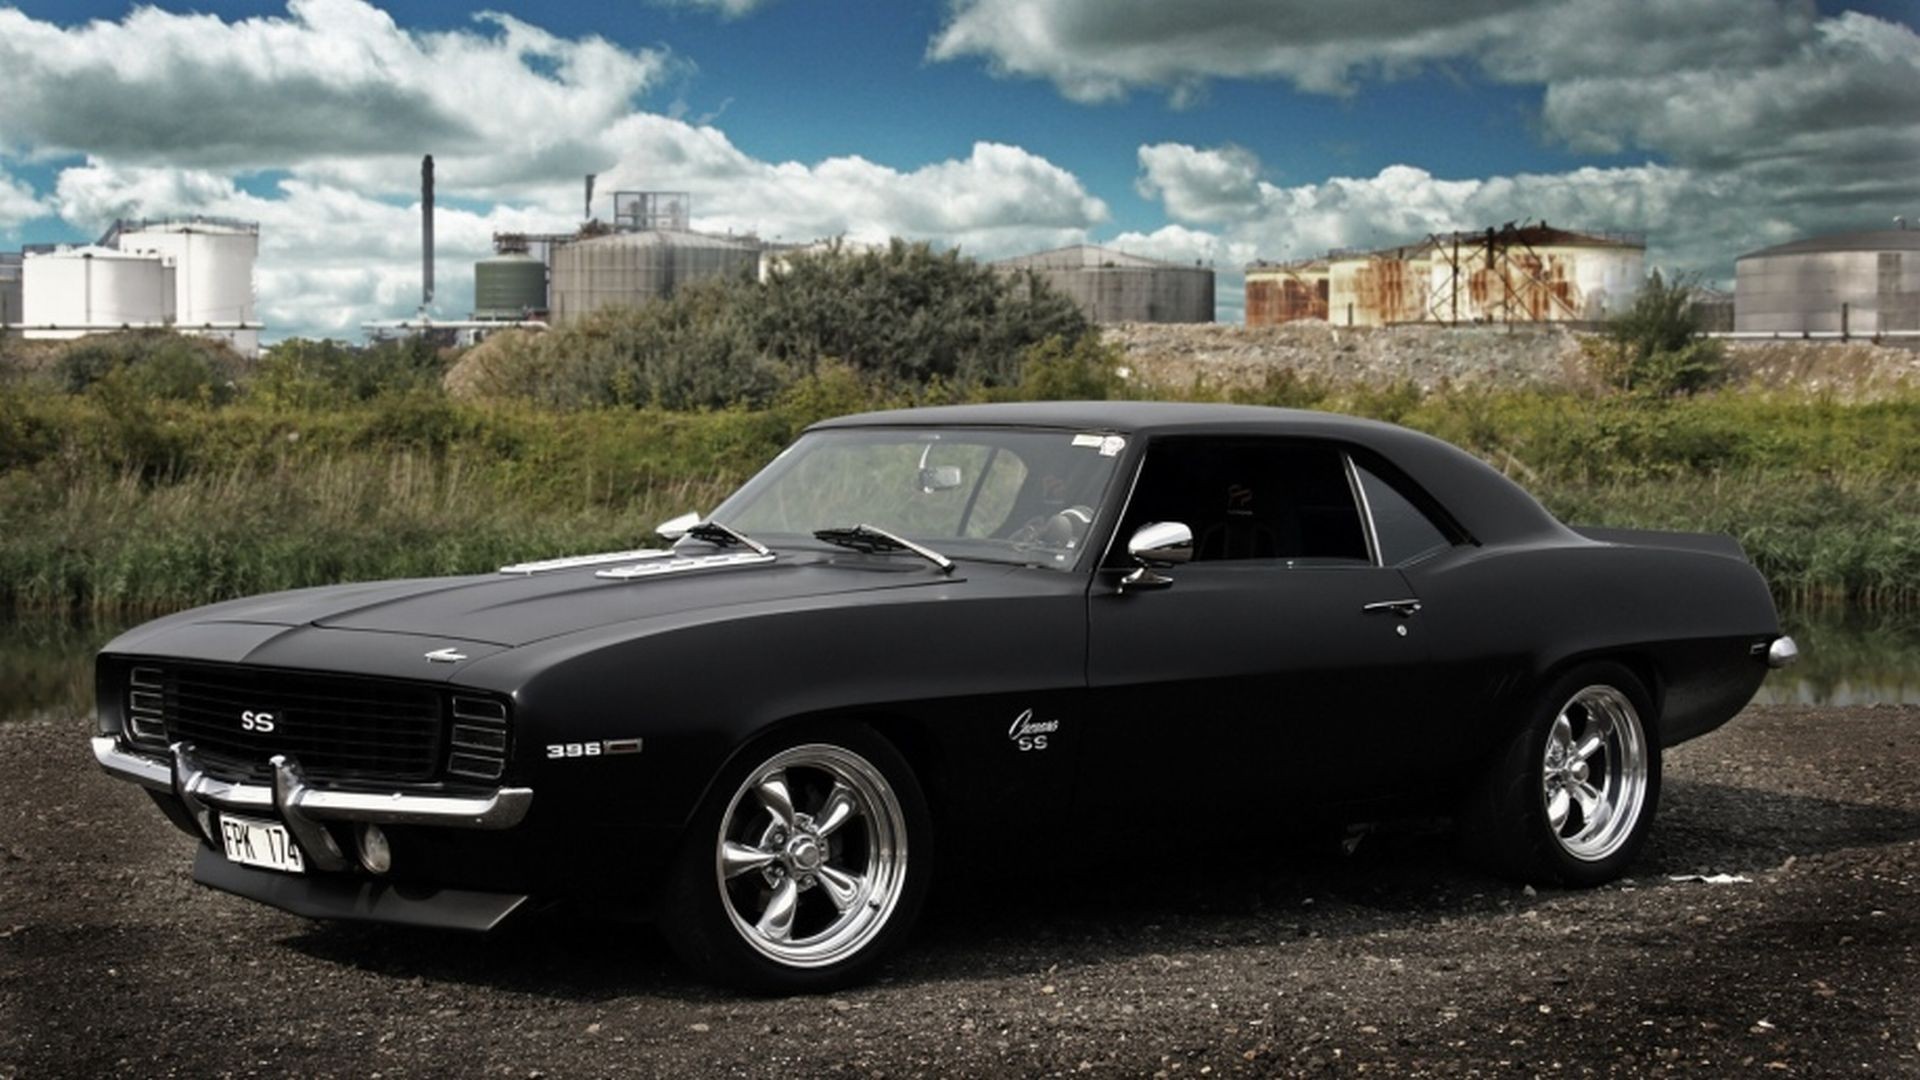 Muscle Cars Hd Wallpapers muscle cars hd wallpaper 1920x1080